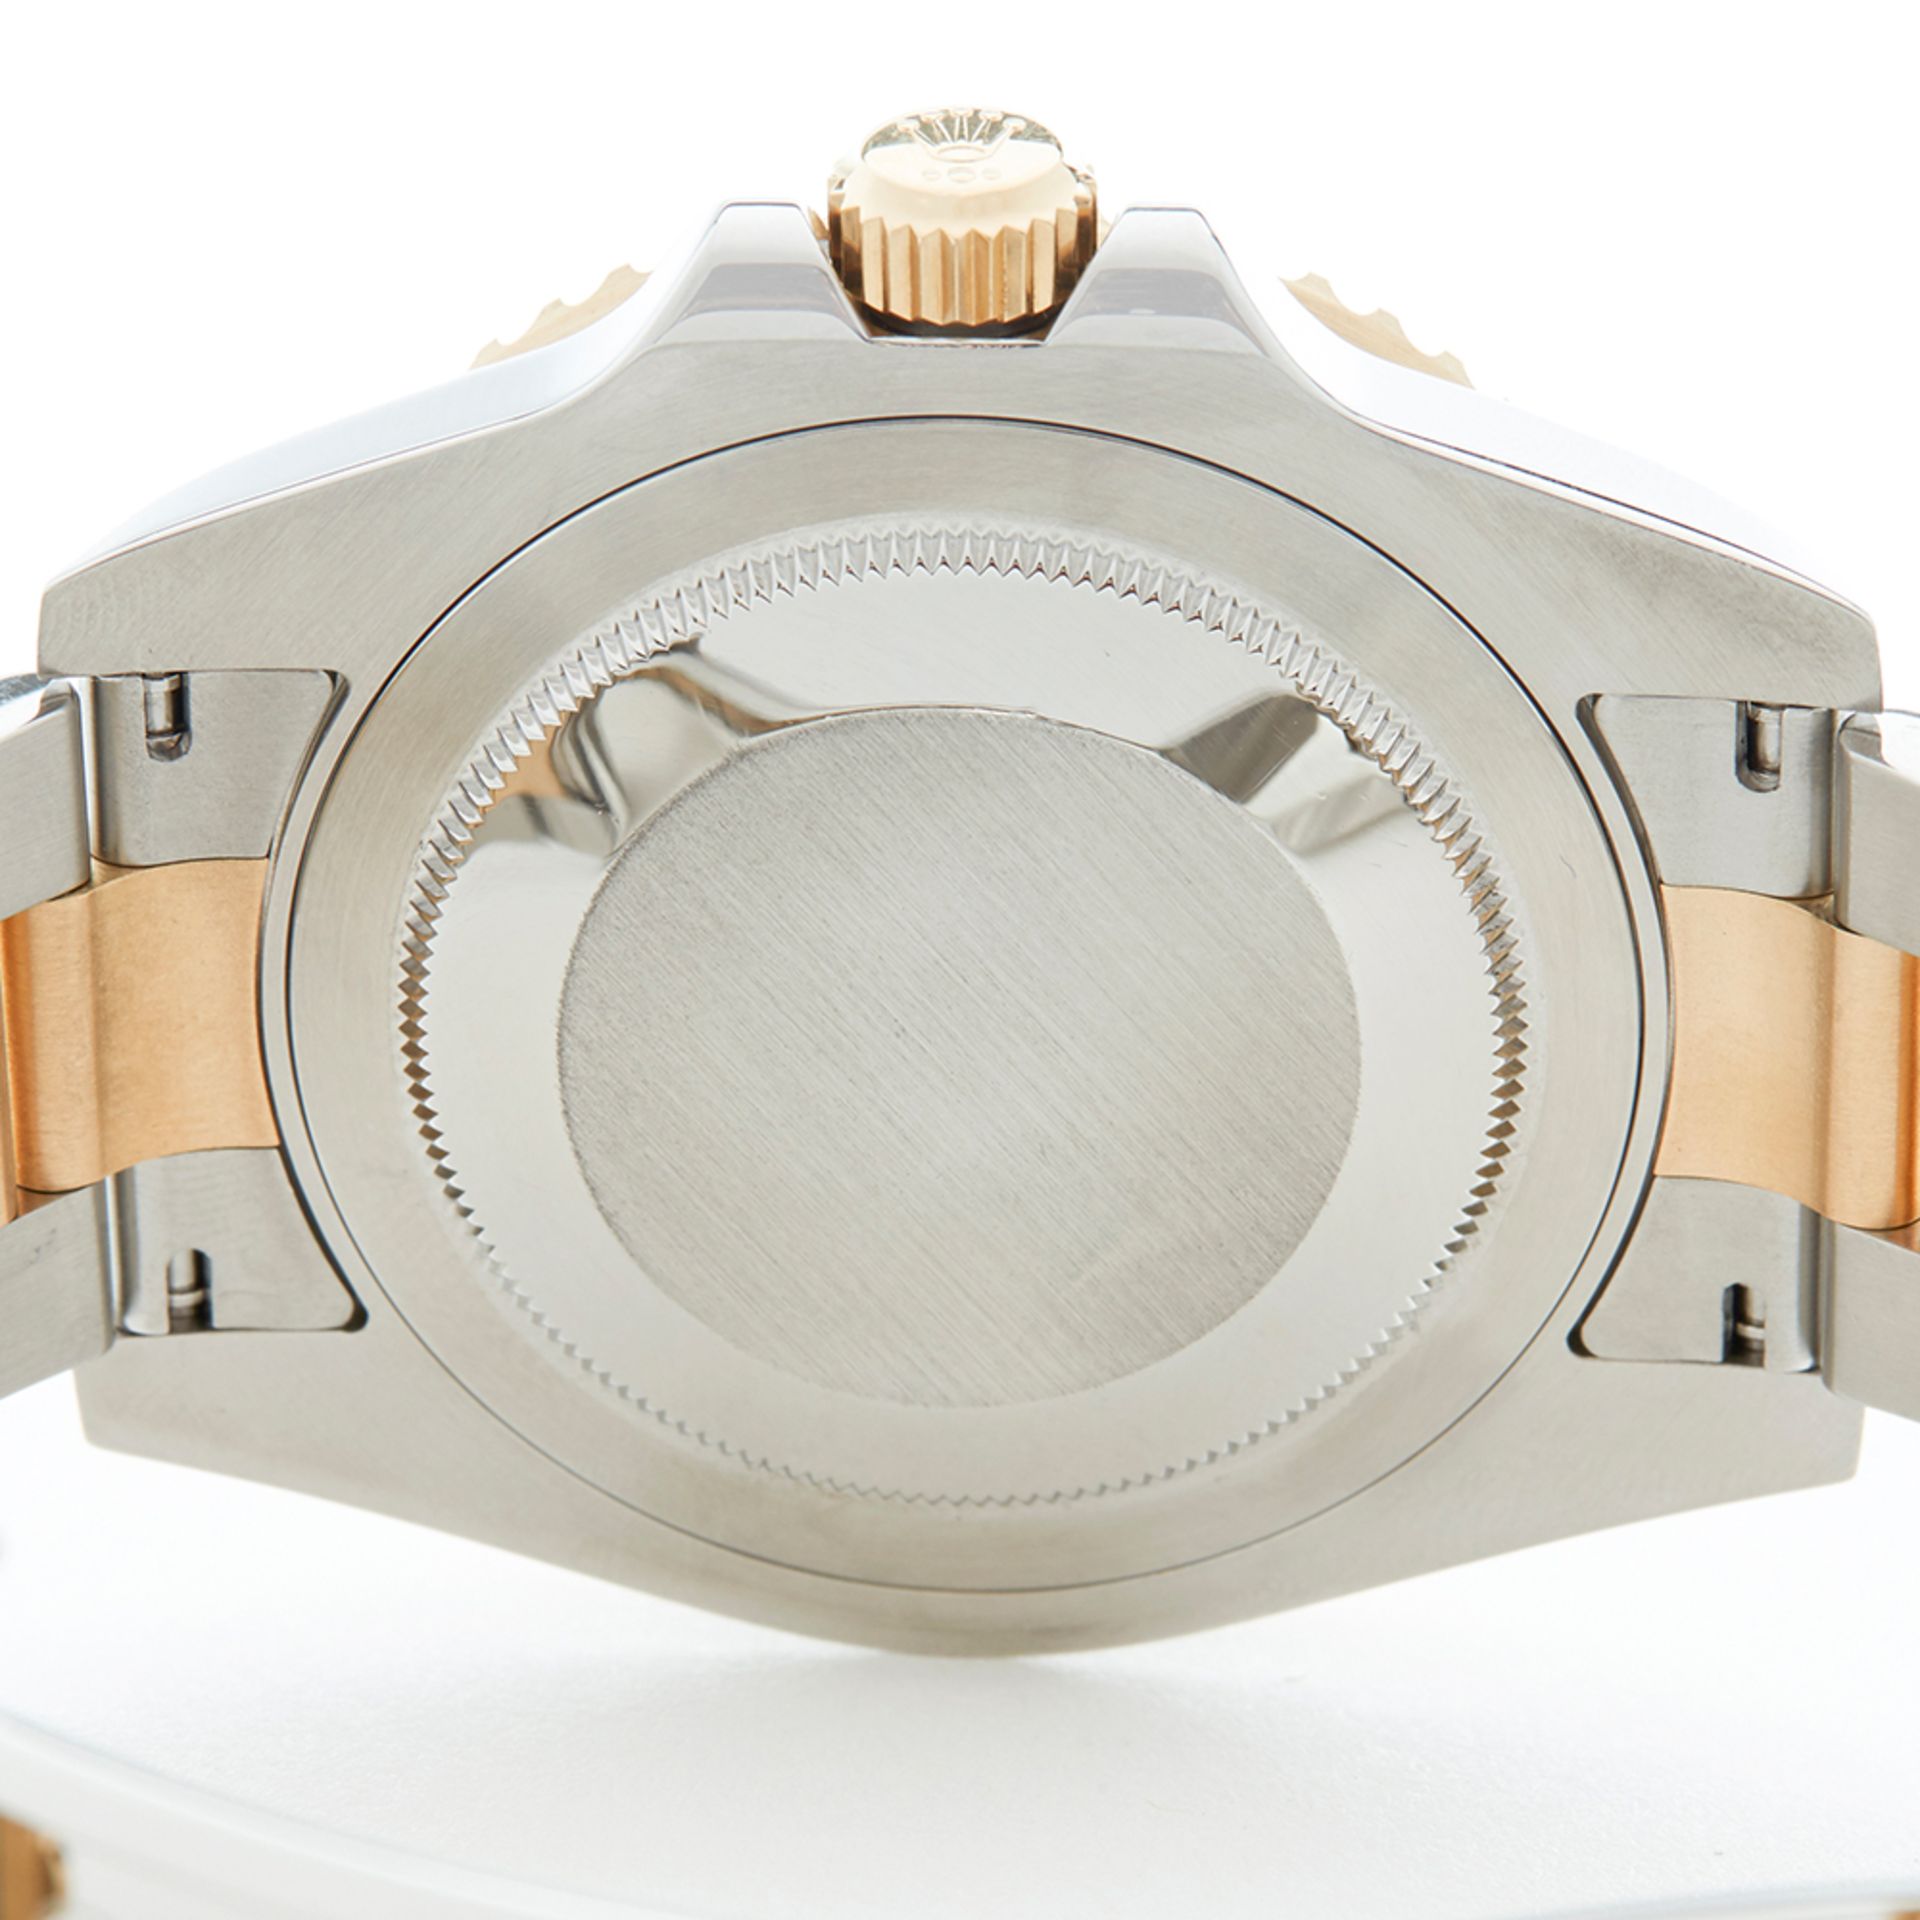 GMT-Master II 40mm Stainless Steel & 18K Yellow Gold - 116713LN - Image 8 of 9